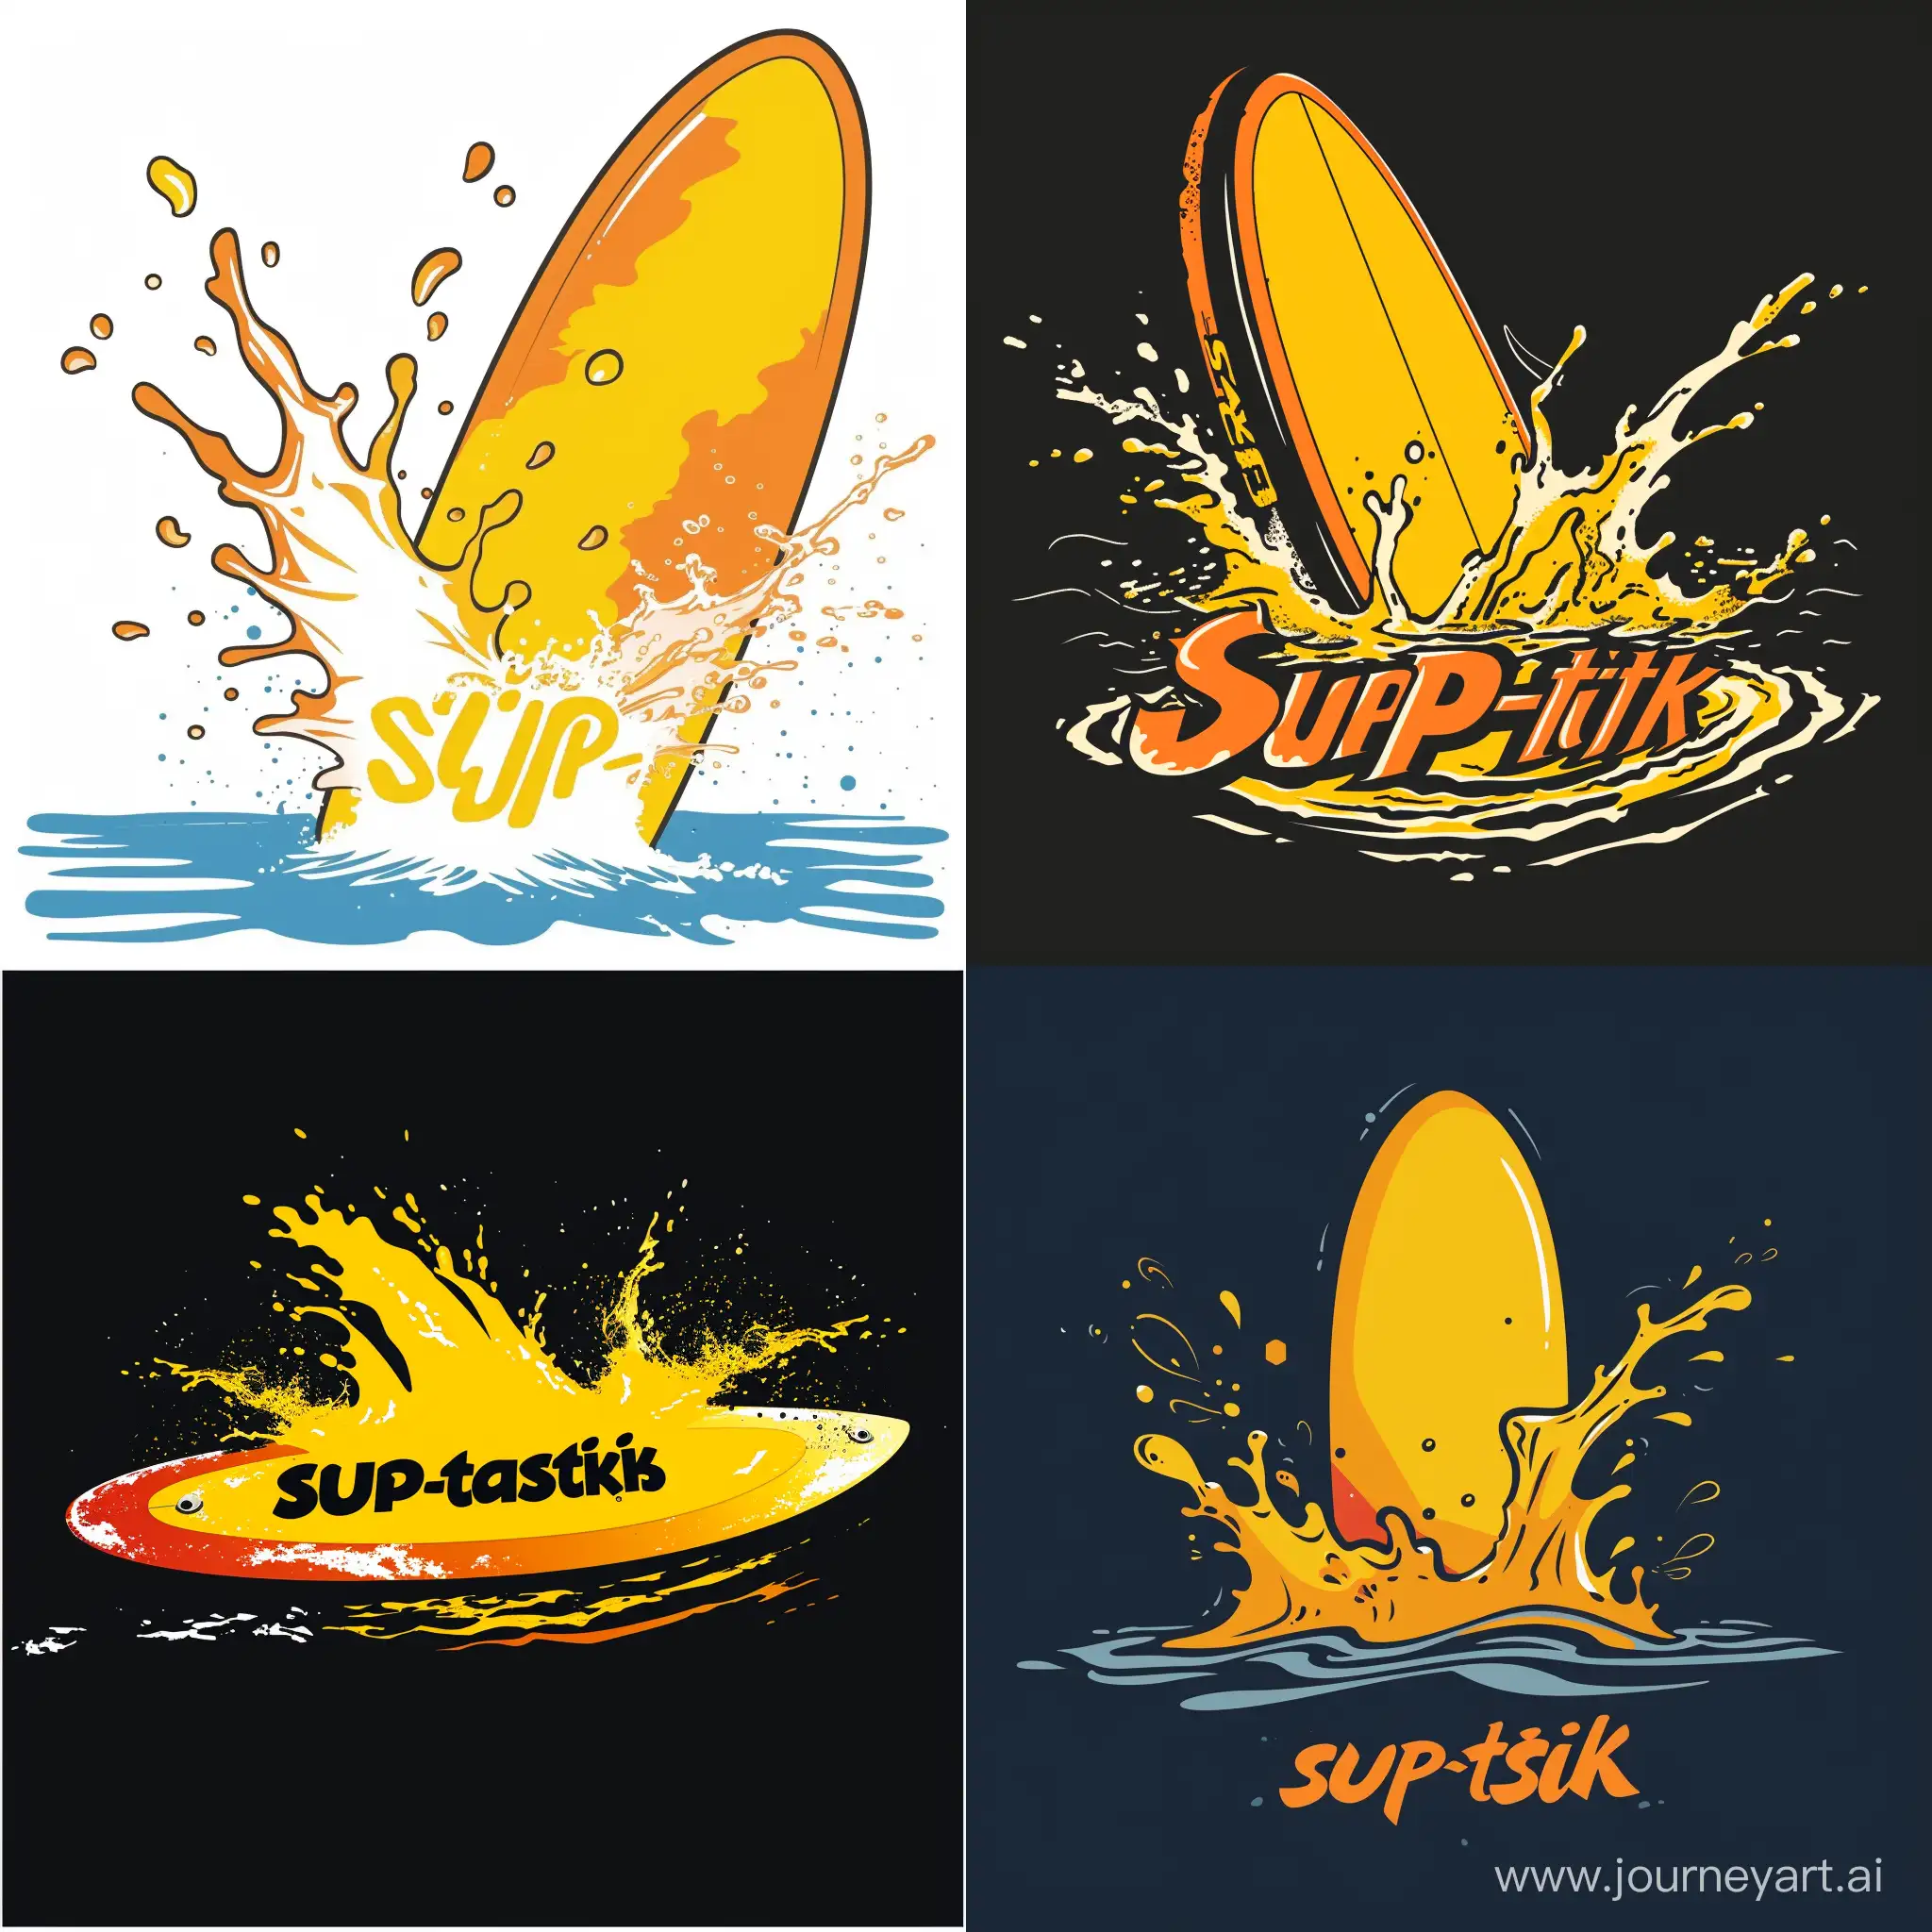 Make a logo with a yellow and orange  SUP board splashing ing the water. Write "SUP-tastisk"
